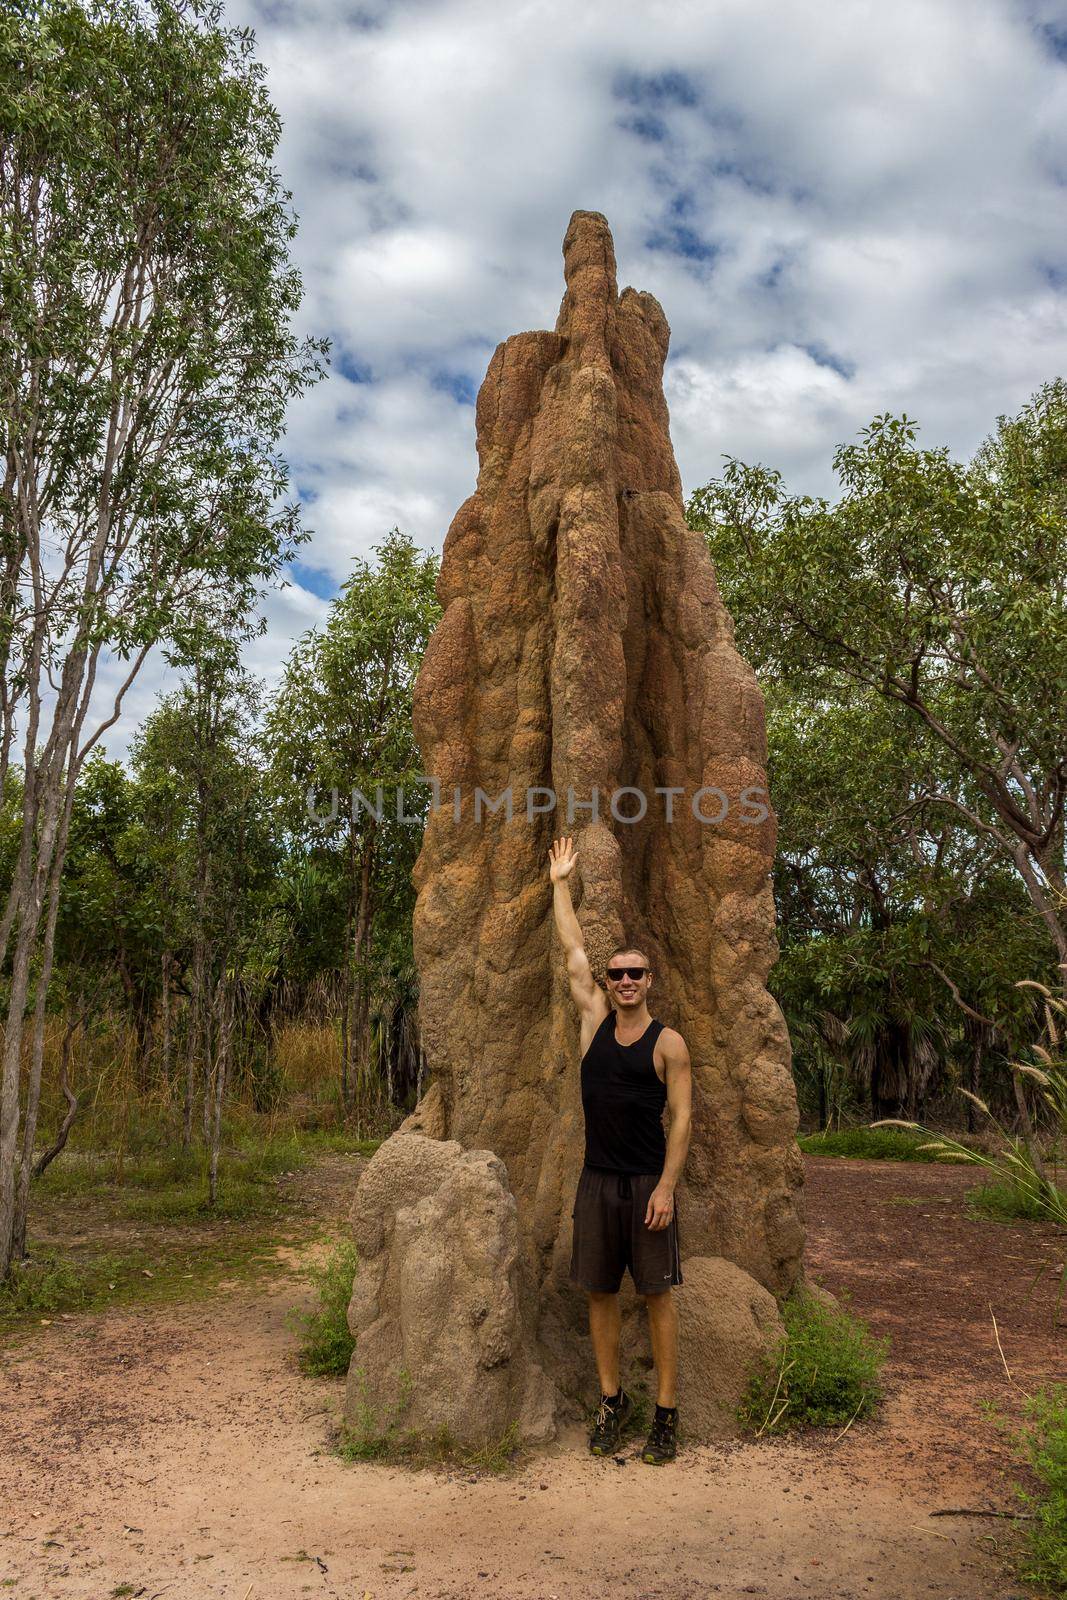 Termite Mound in Litchfield National Park, Northern Territory, Australia by bettercallcurry